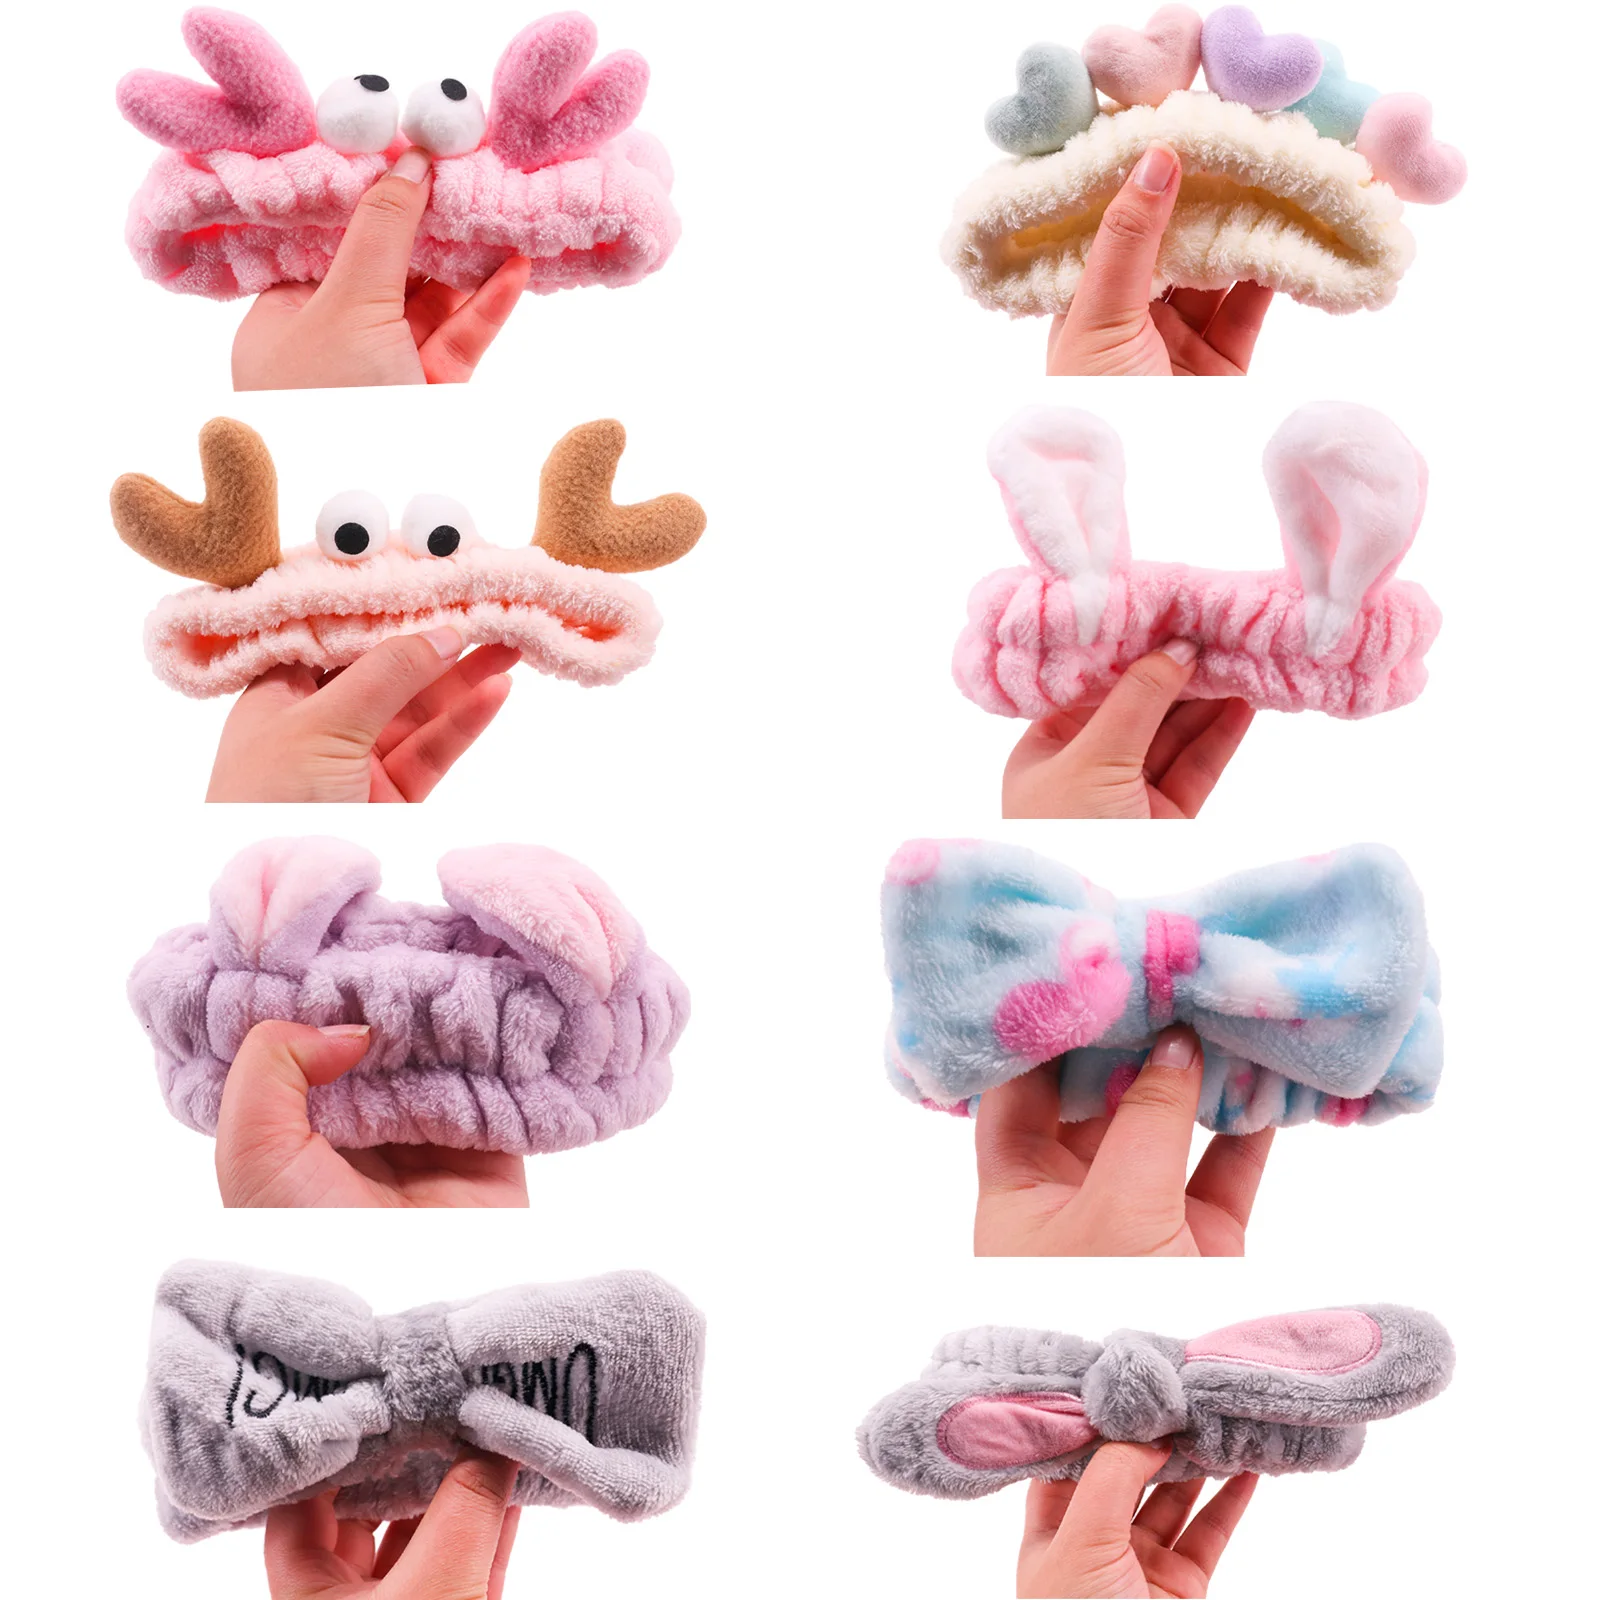 1PC Hair Band Glasses Doll Accessories for 30cm LaLafanfan Duck Plush Dolls Outfit Headband Sweater for 20-30cm Plush Toy